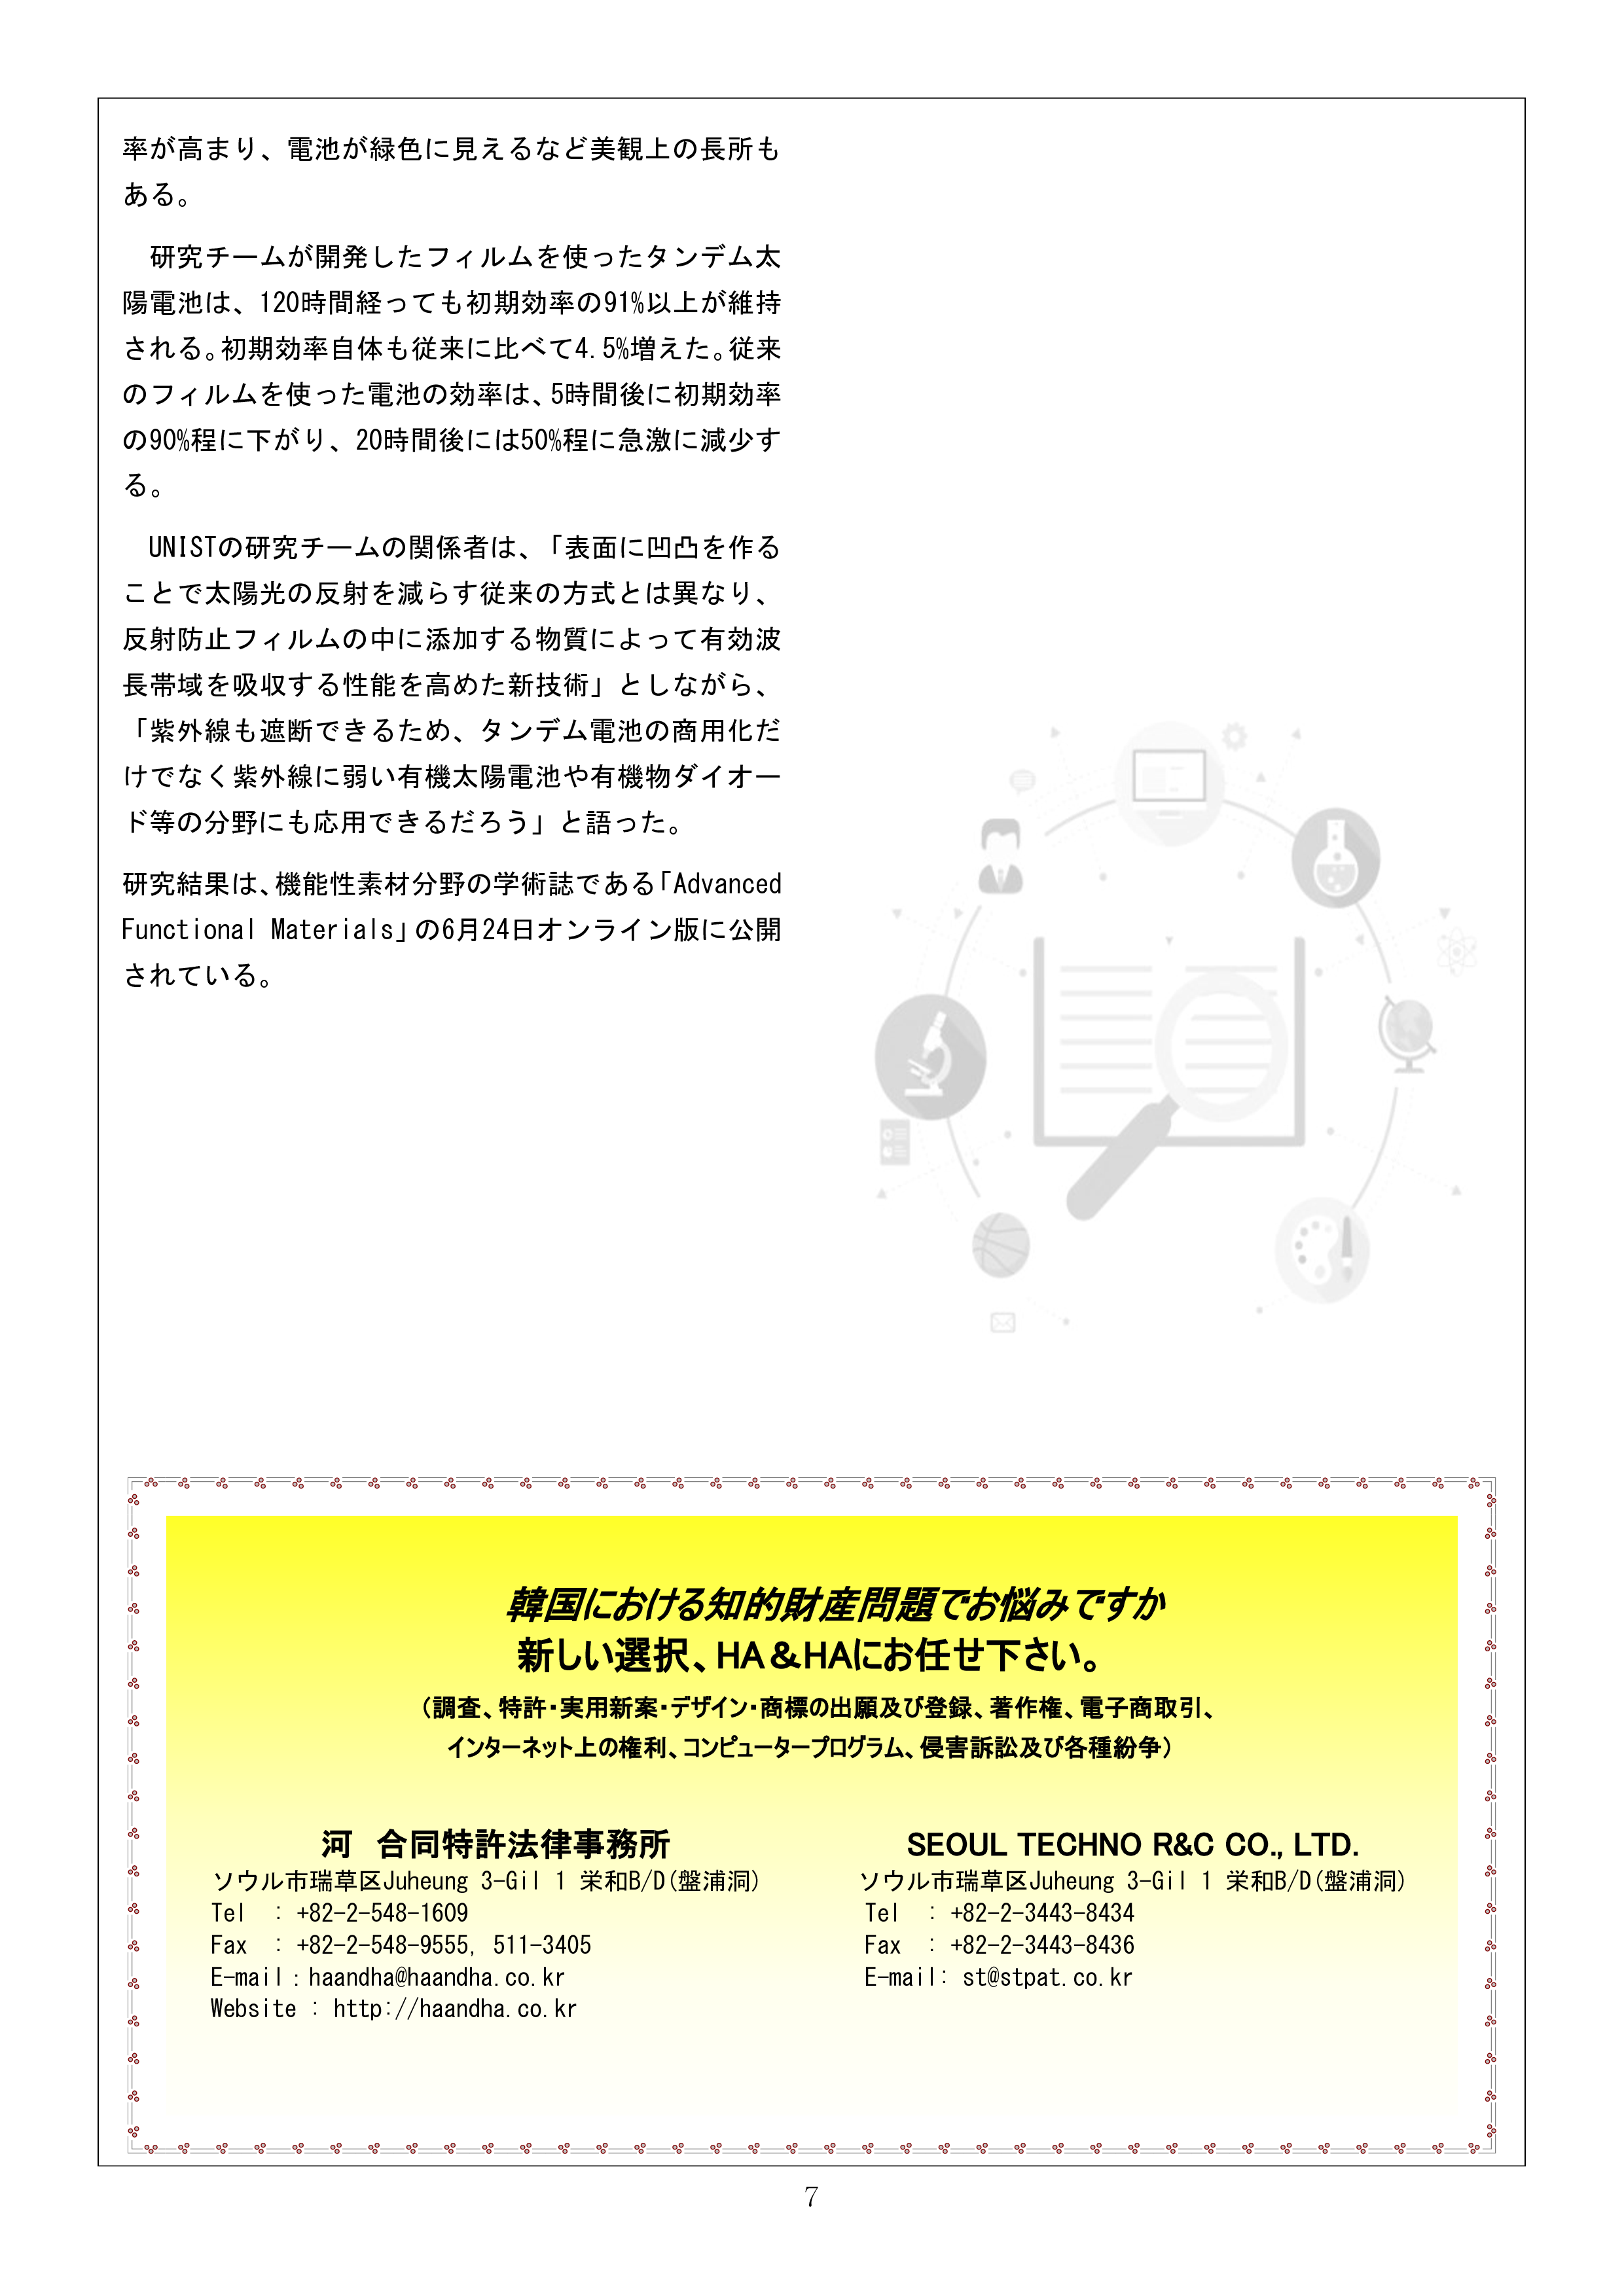 Newsletter_202208_7.png